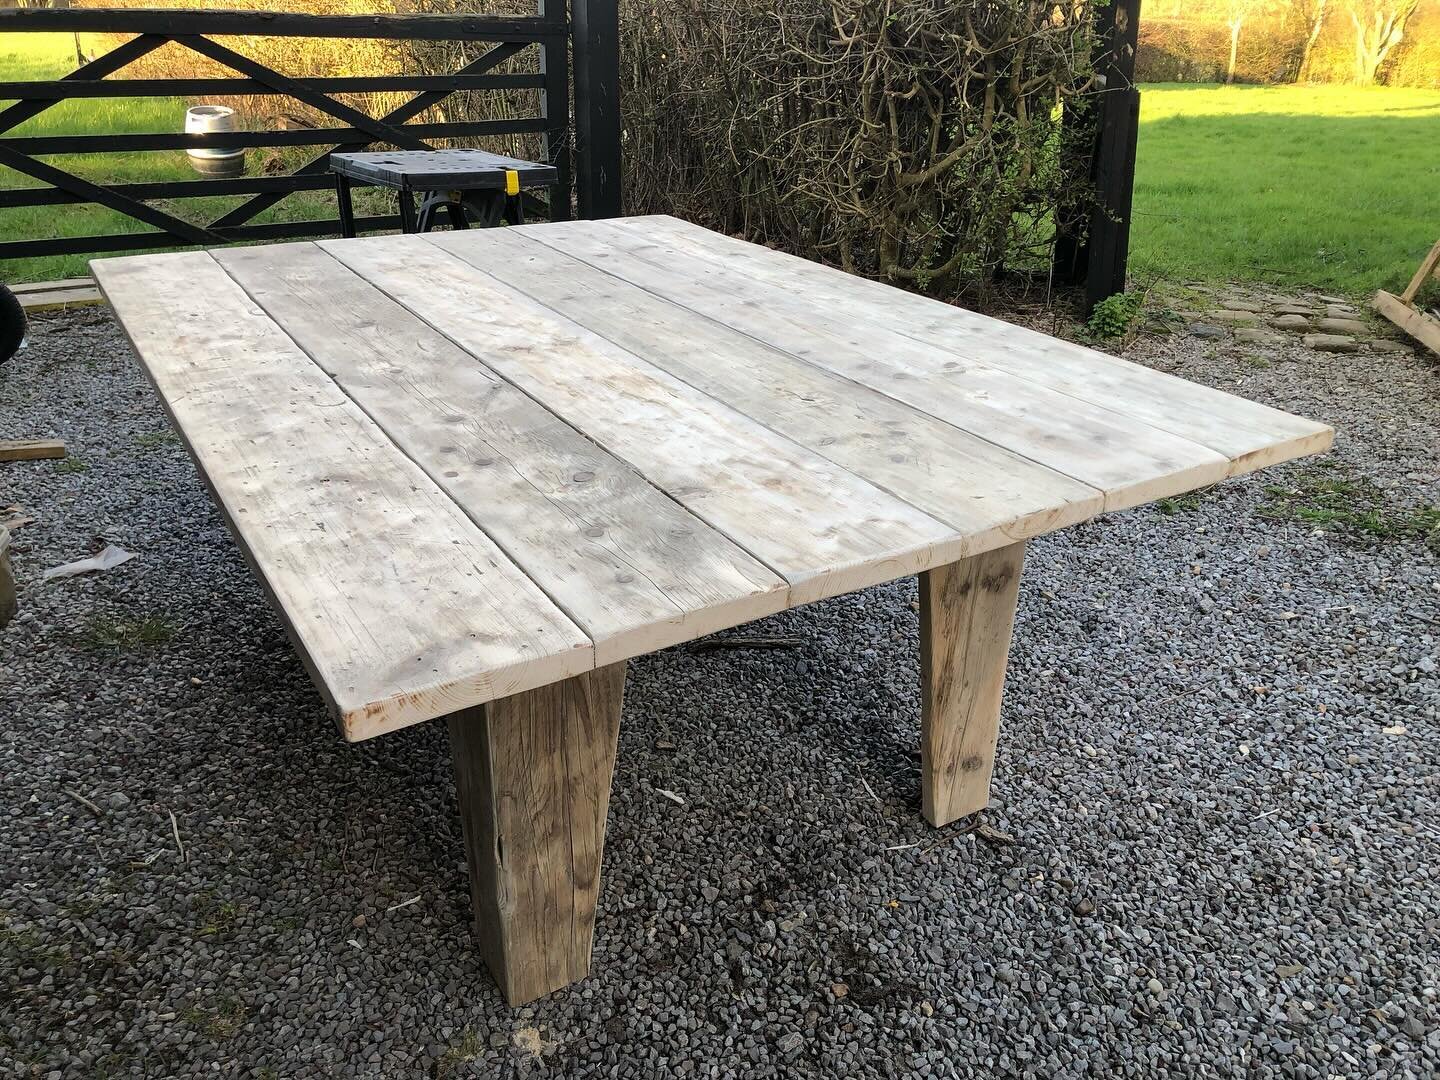 New table for the new booth downstairs - huge - all made from old scaffold planks- we think it will seat 12 - maybe more - but it&rsquo;s going to be a great feature - thanks to @richardfryermakes - #recycle #upcycle #carpentry